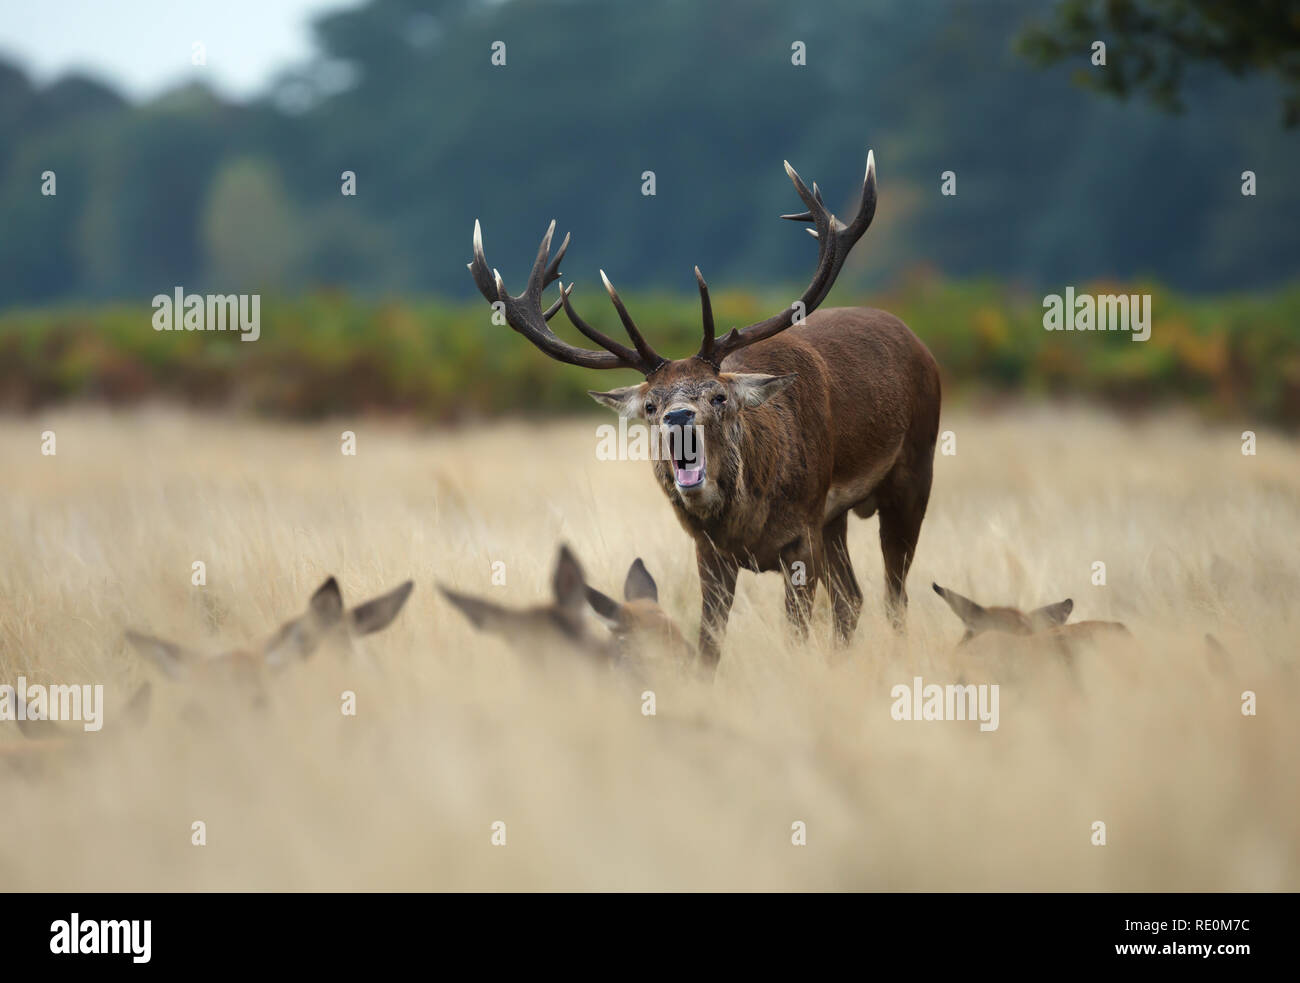 Red Deer stag bellowing while standing in the field among a group of hinds during rutting season, UK. Stock Photo